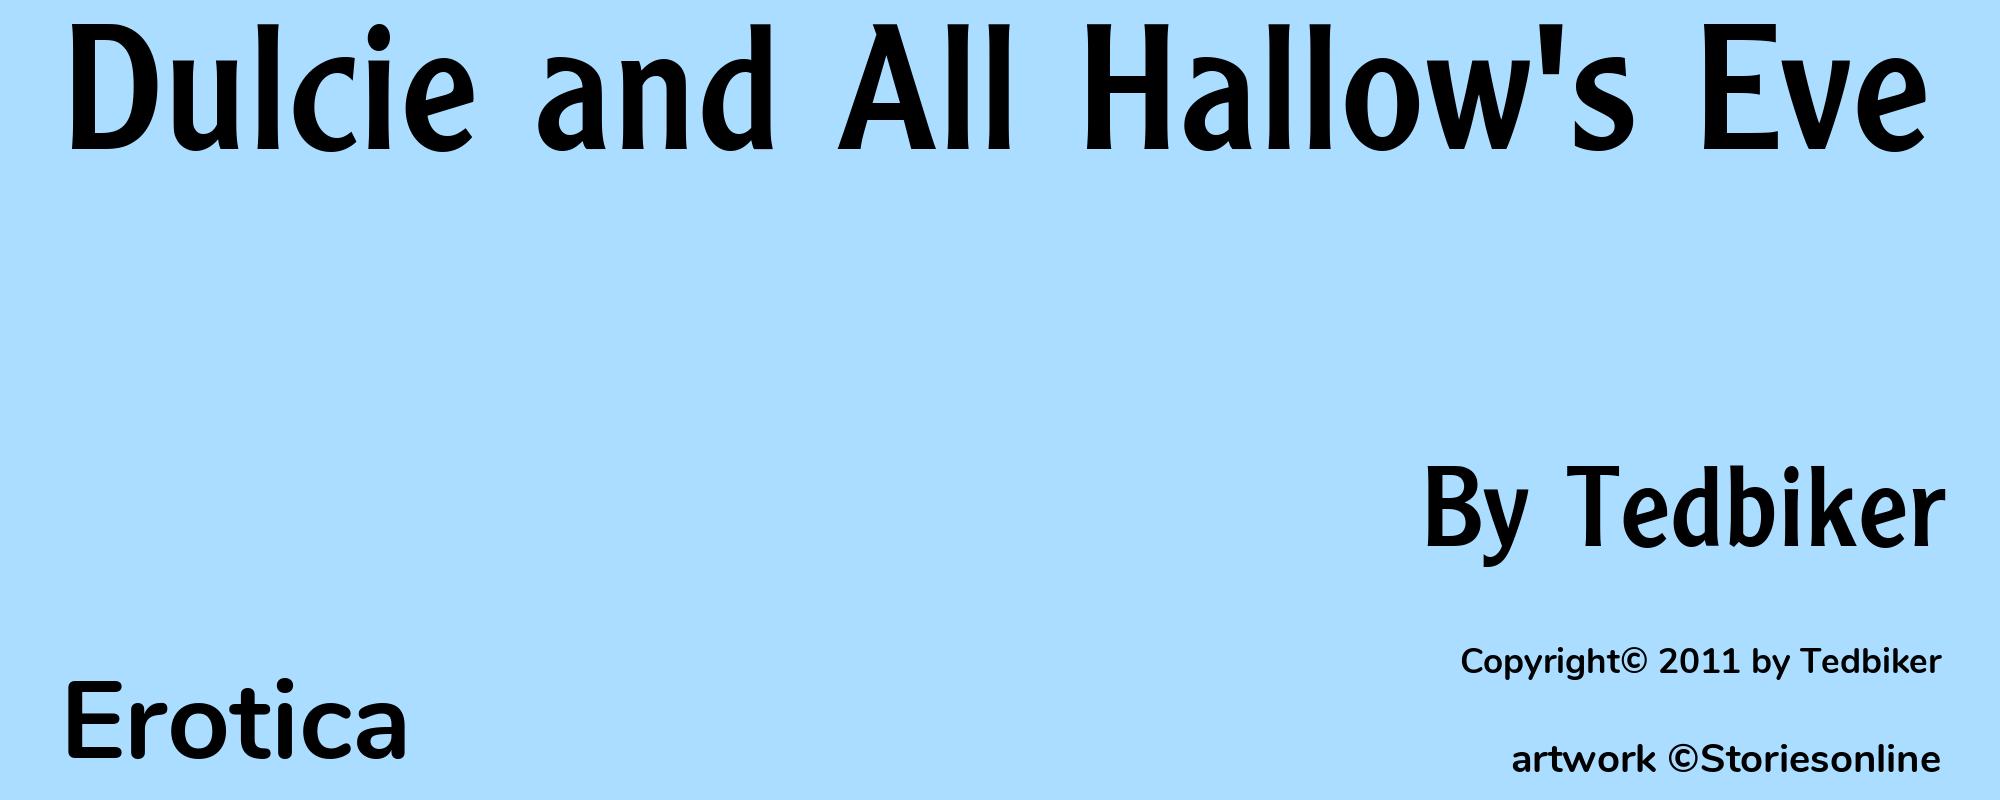 Dulcie and All Hallow's Eve - Cover